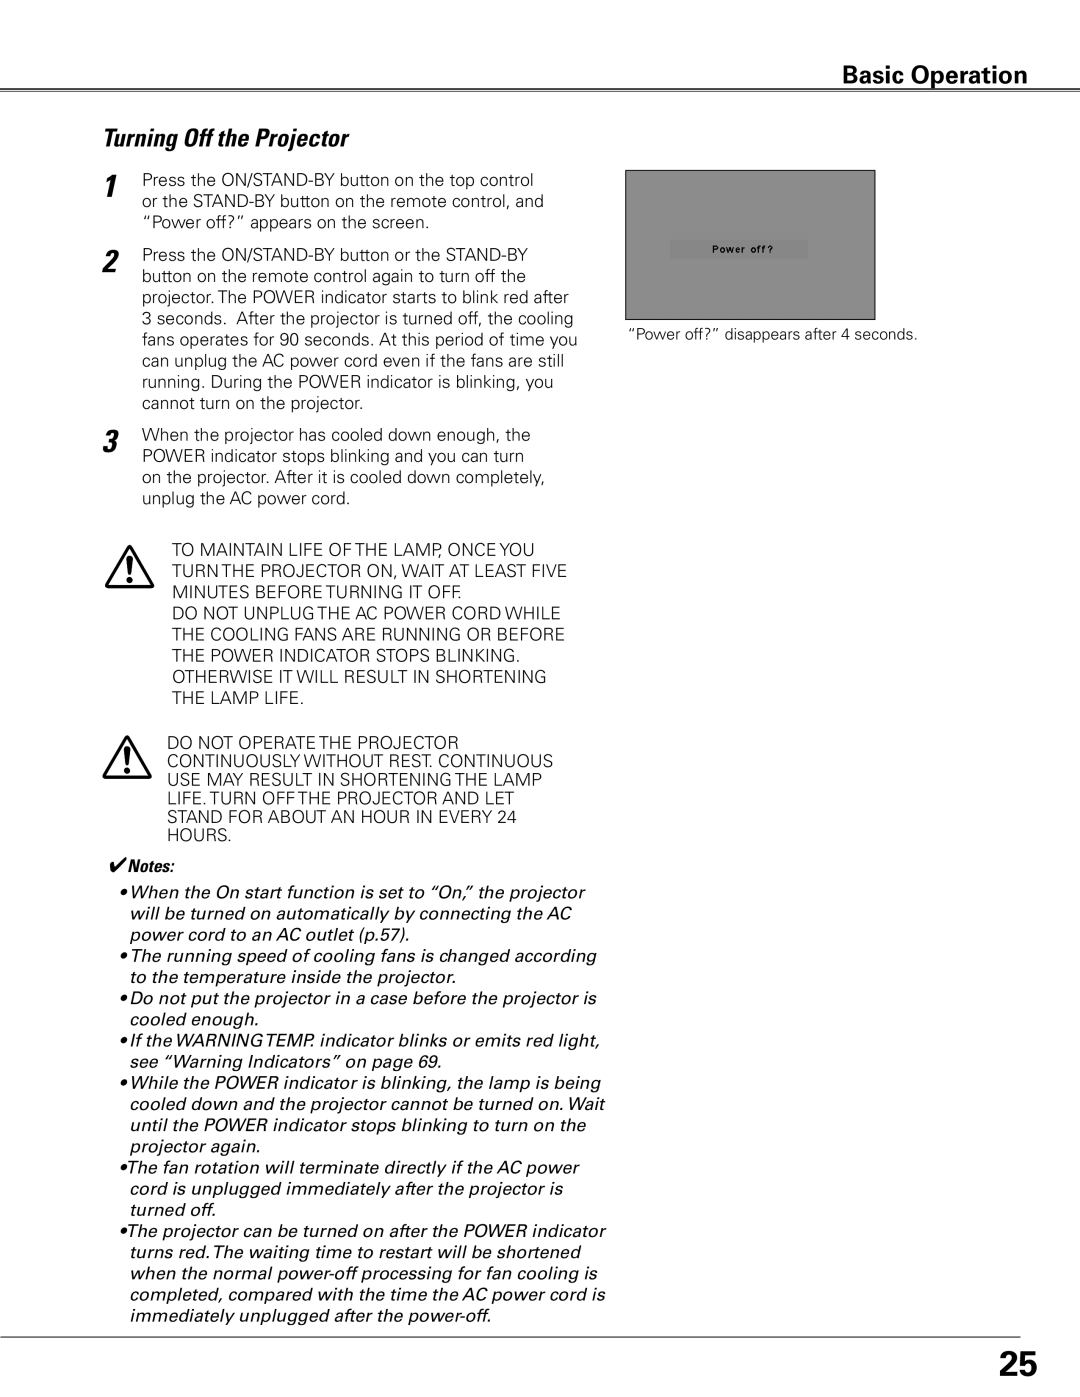 Sanyo WTC500L owner manual Basic Operation, Turning Off the Projector, Notes 